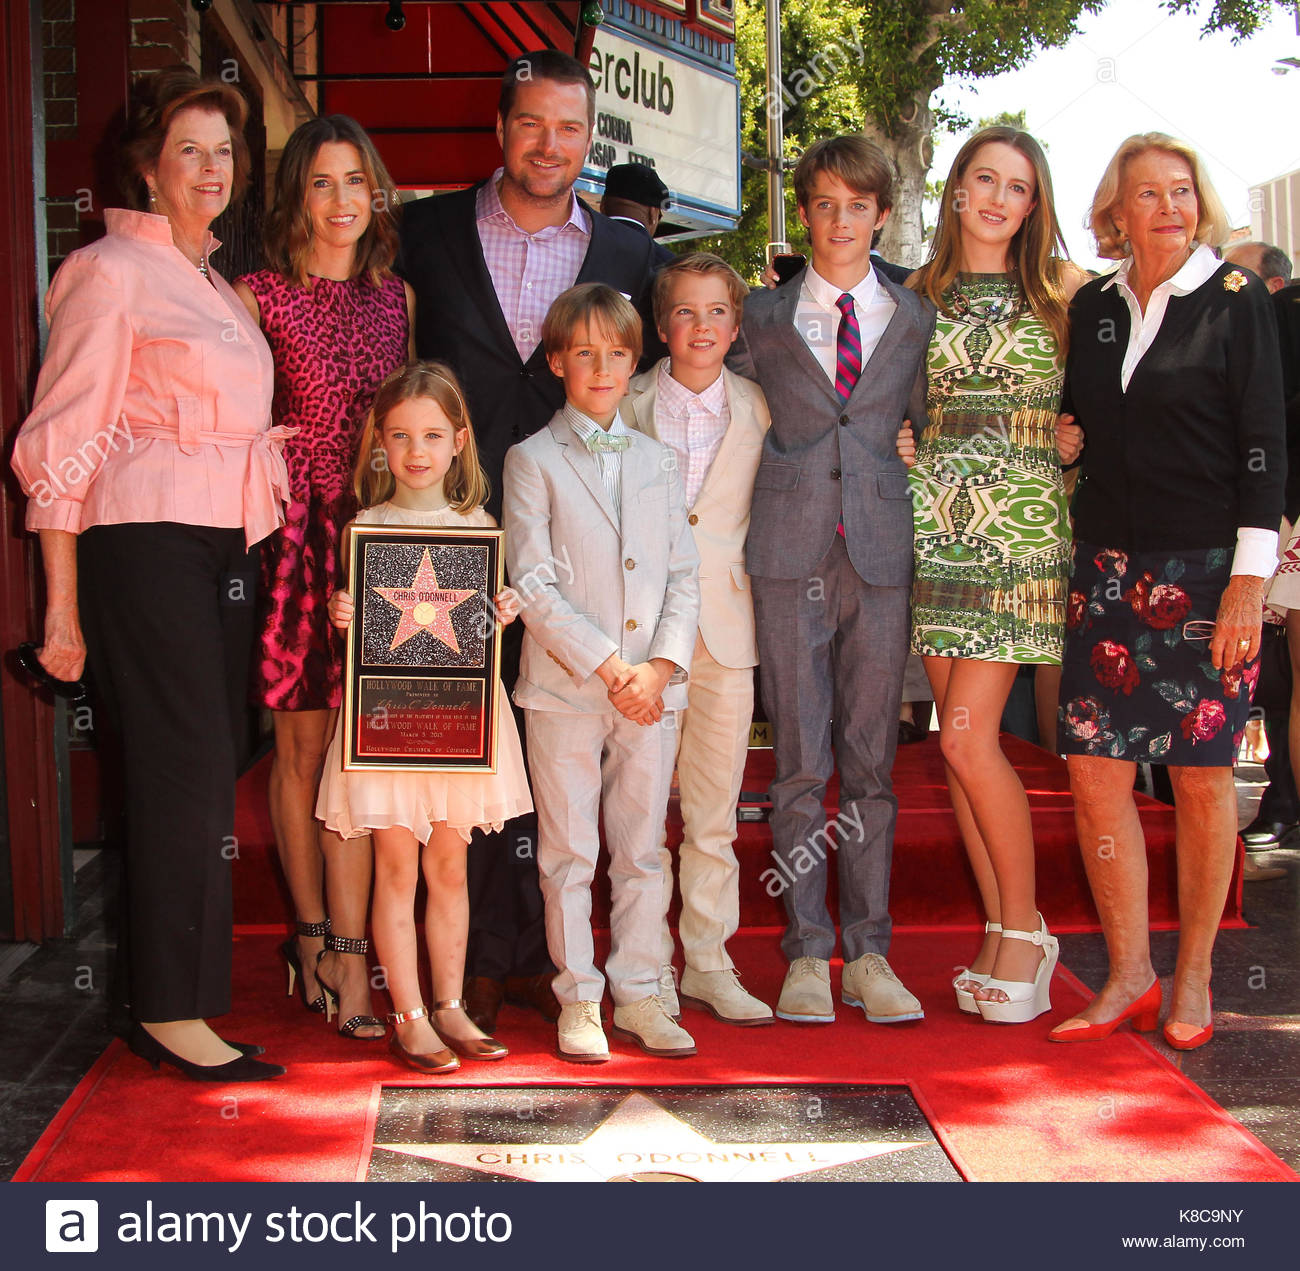 Caroline Fentress, Maeve O'Donnell, actor Chris O'Donnell, Finley Stock ...